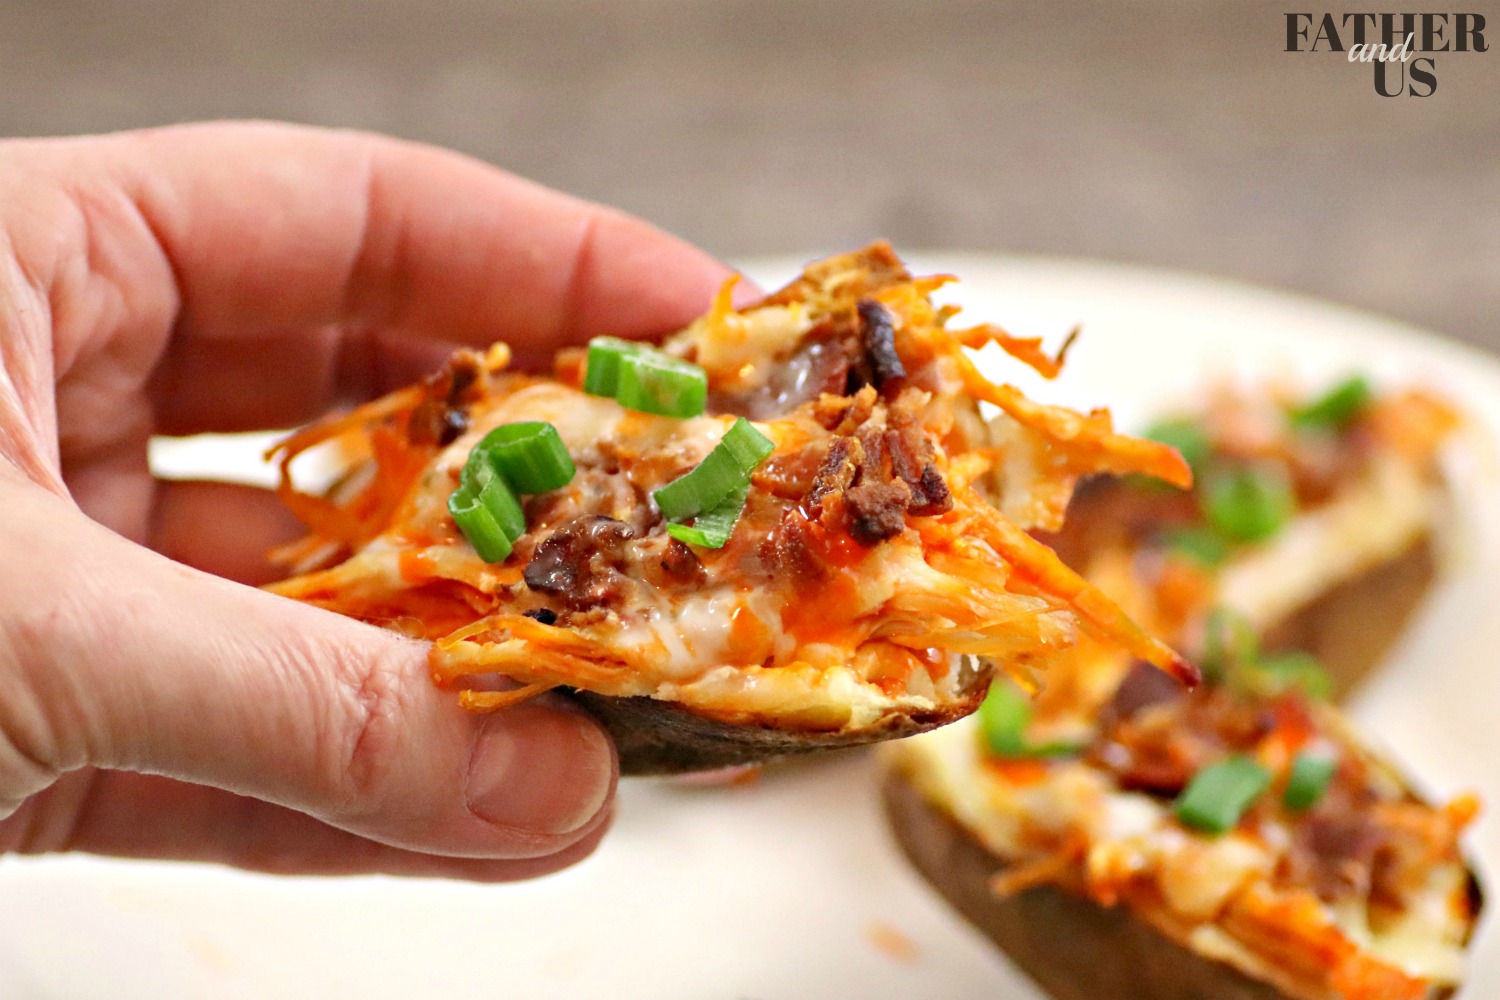 This Air Fryer Potato Skins recipe with buffalo chicken is a great appetizer or game day party food